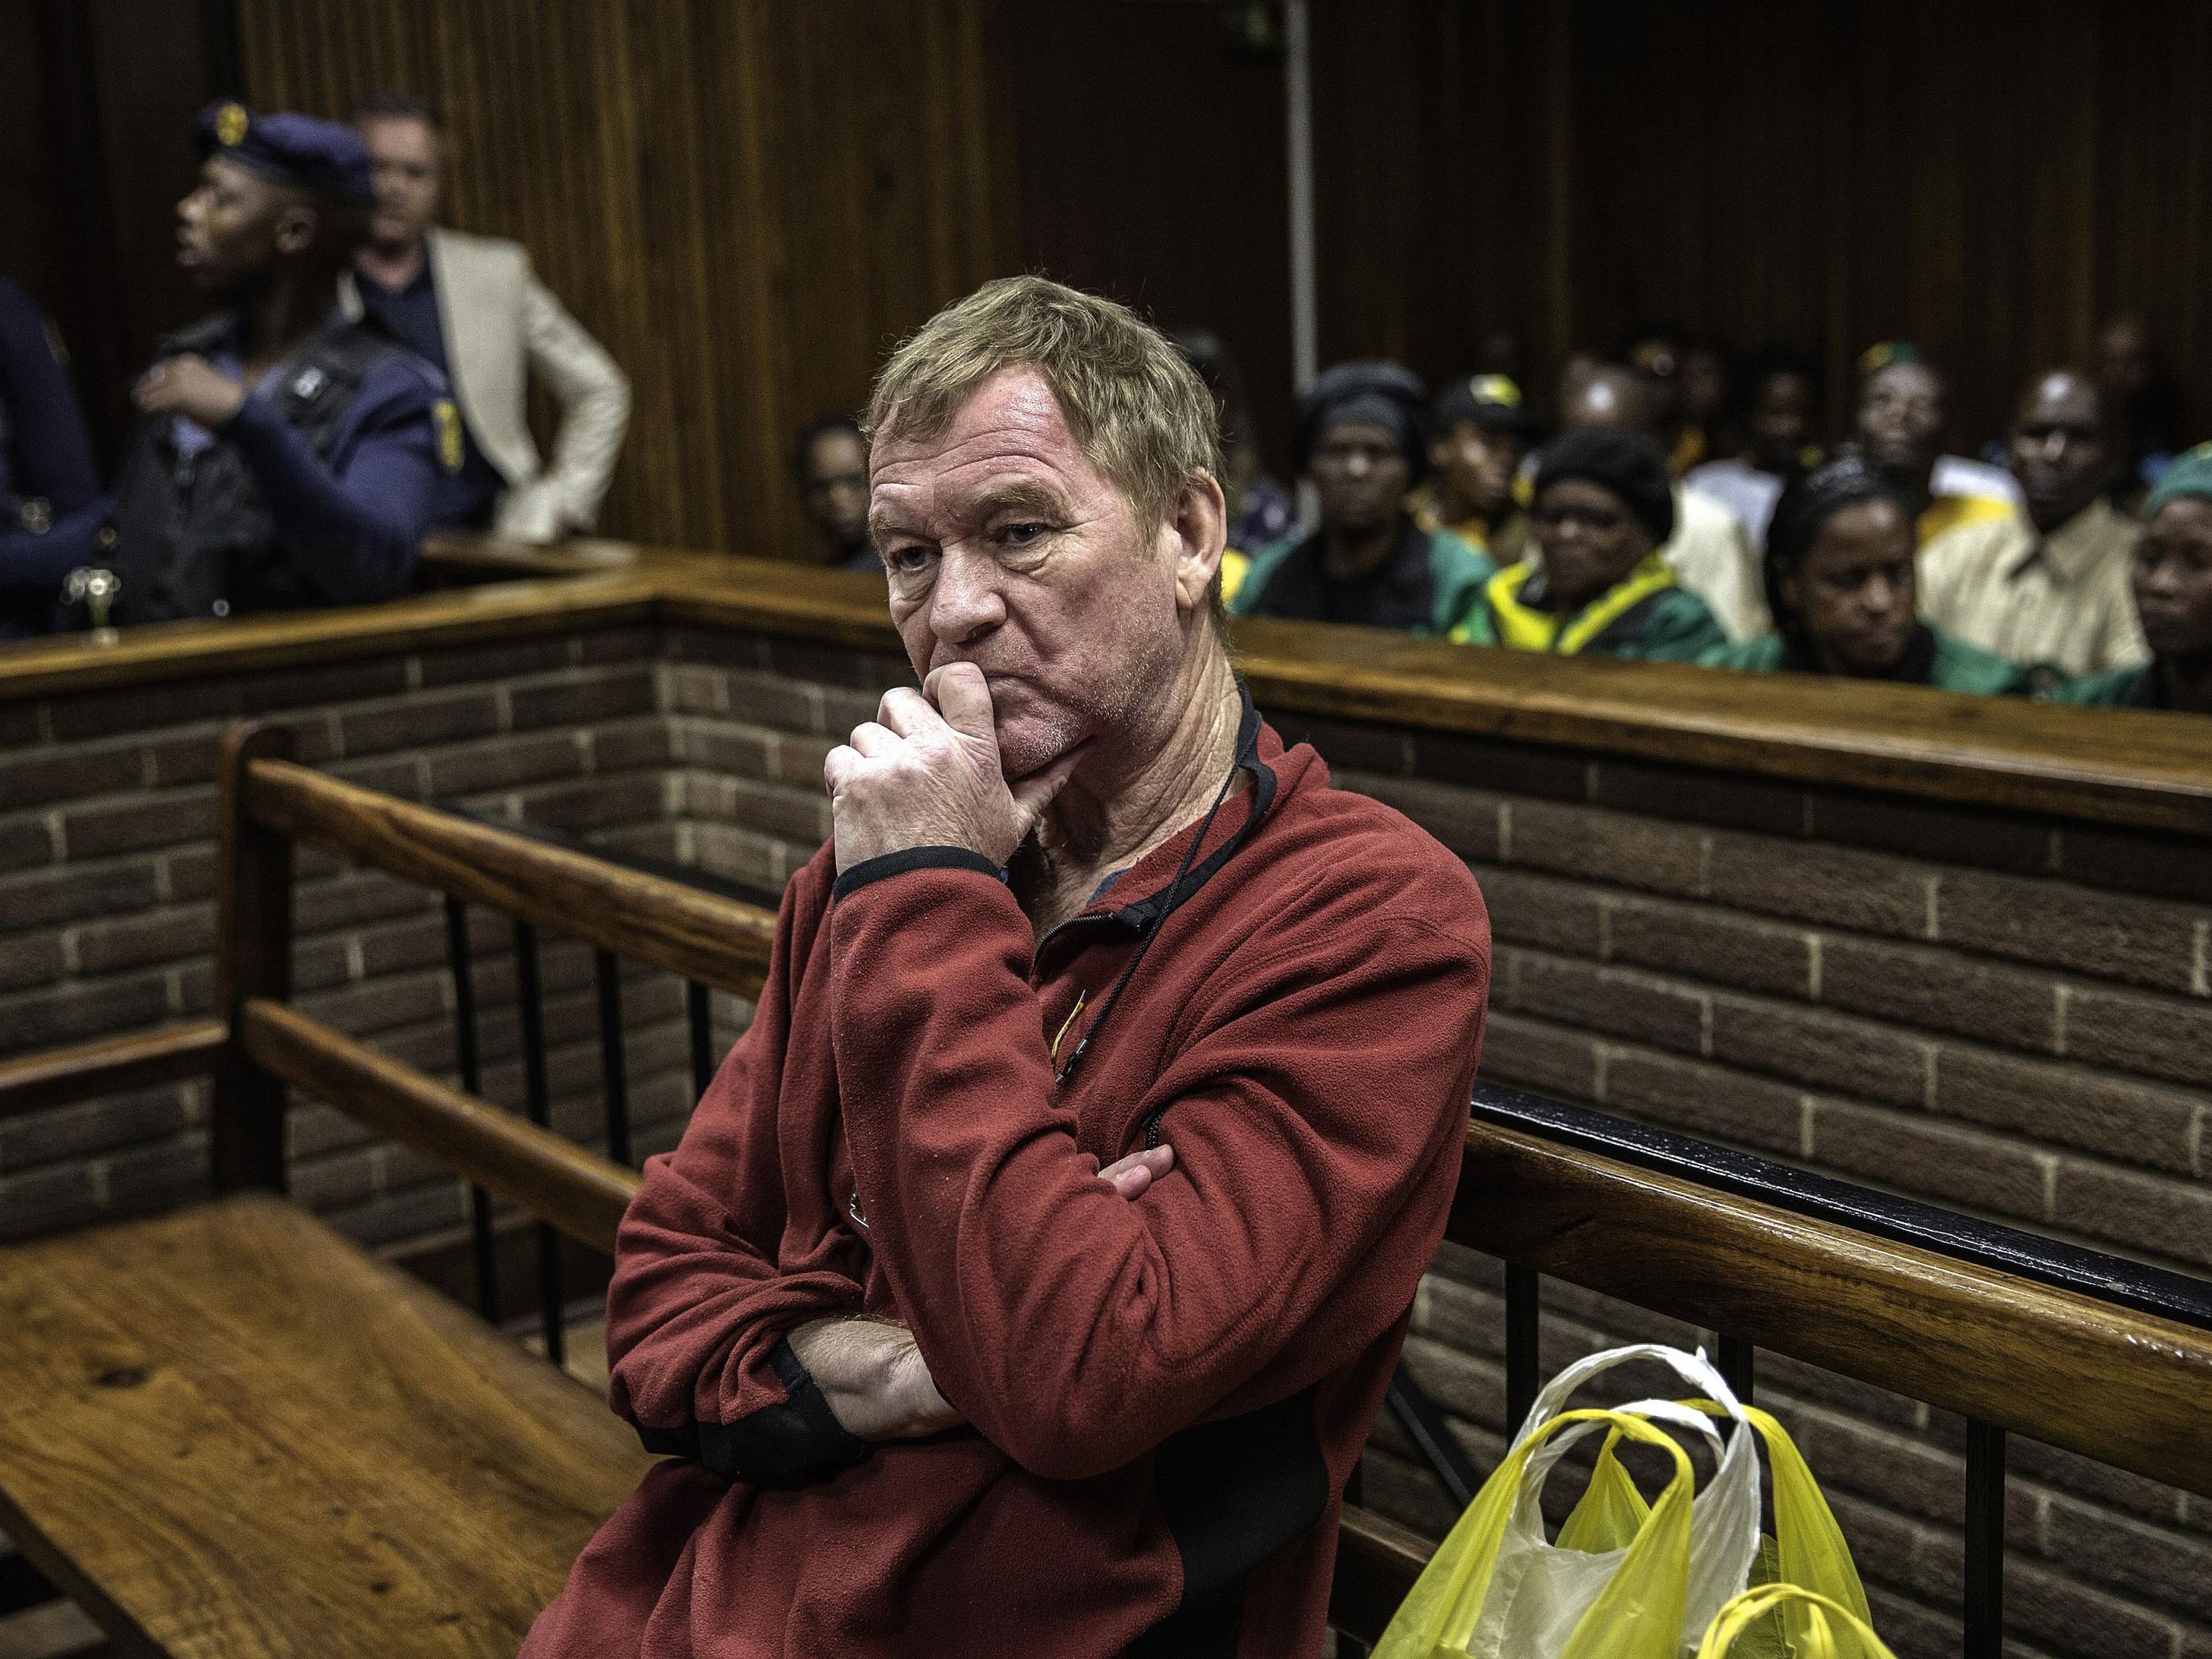 Peter Frederiksen sits in the accused dock ahead of his bail application at the Bloemfontein Magistrate's court on November 4, 2015